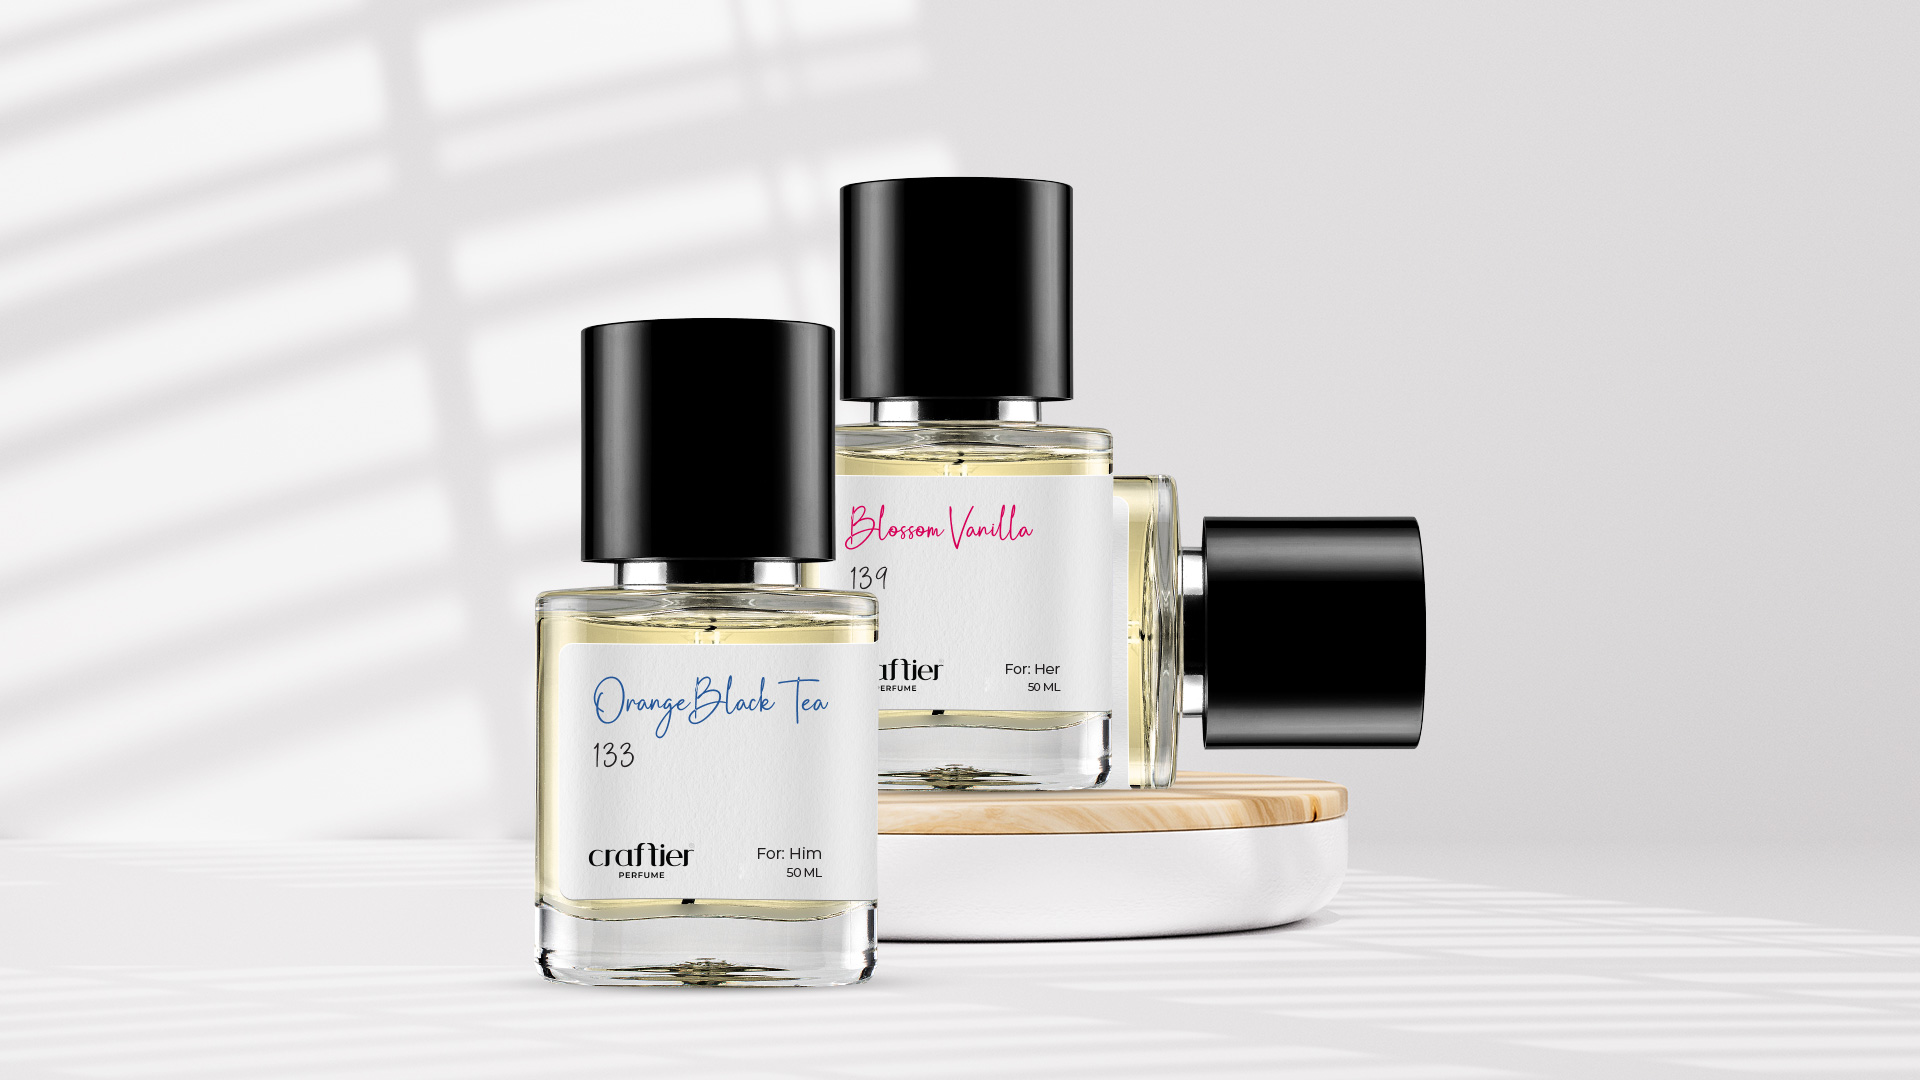 Smell Amazing with Our Selection of Branded Perfumes: Popular Perfume Brands at Reasonable Prices ​